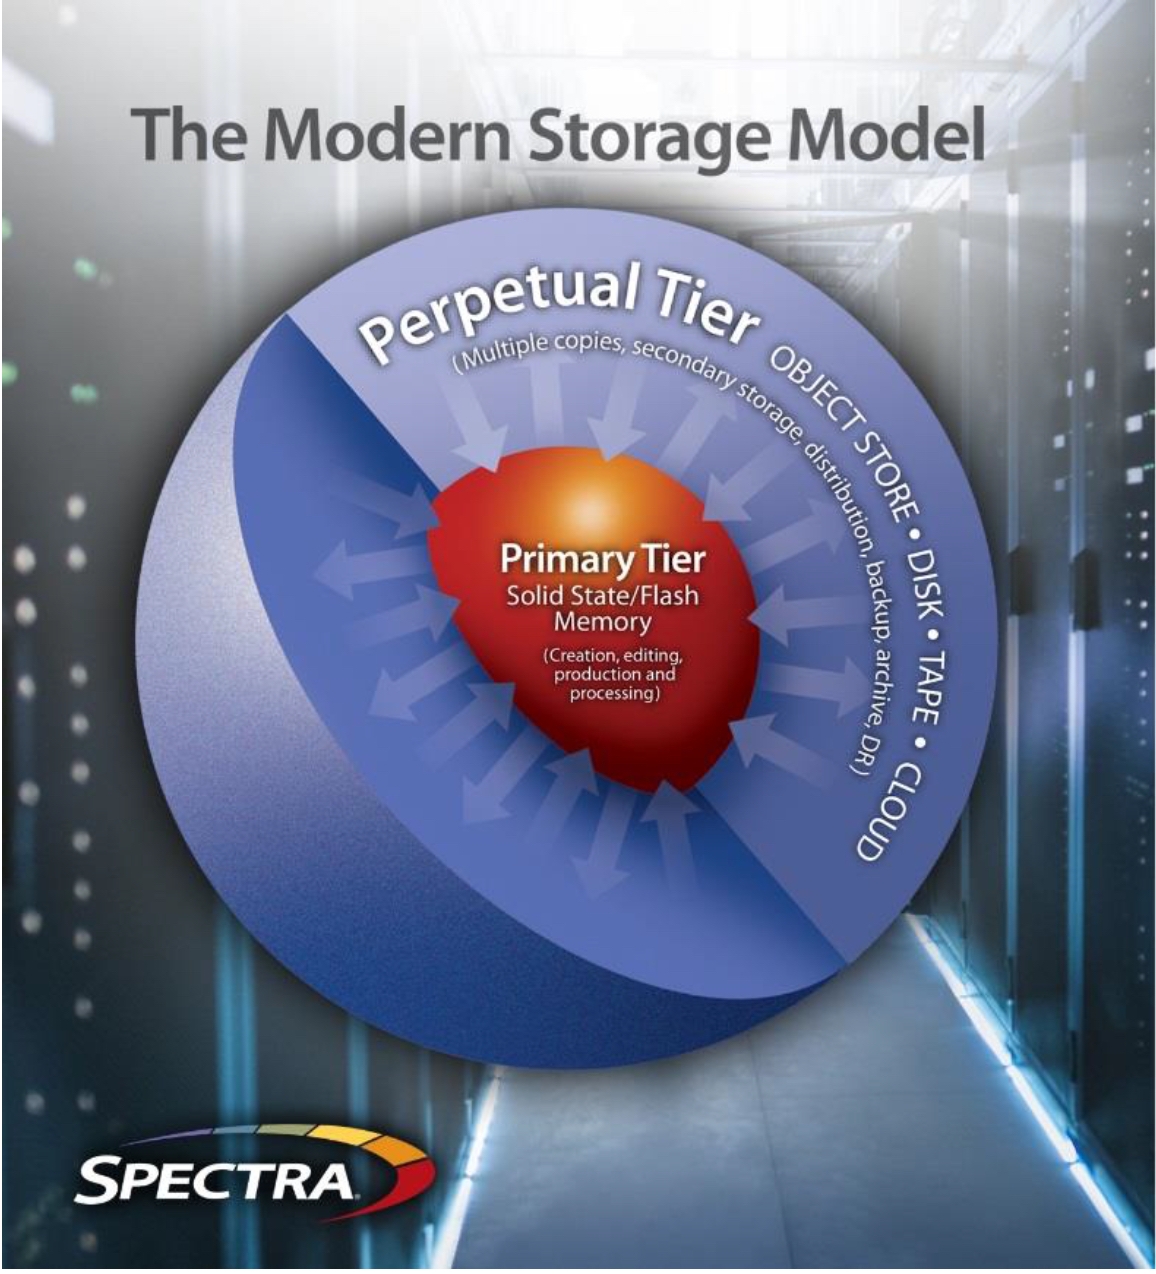 StorCycle: The Modern Storage Model